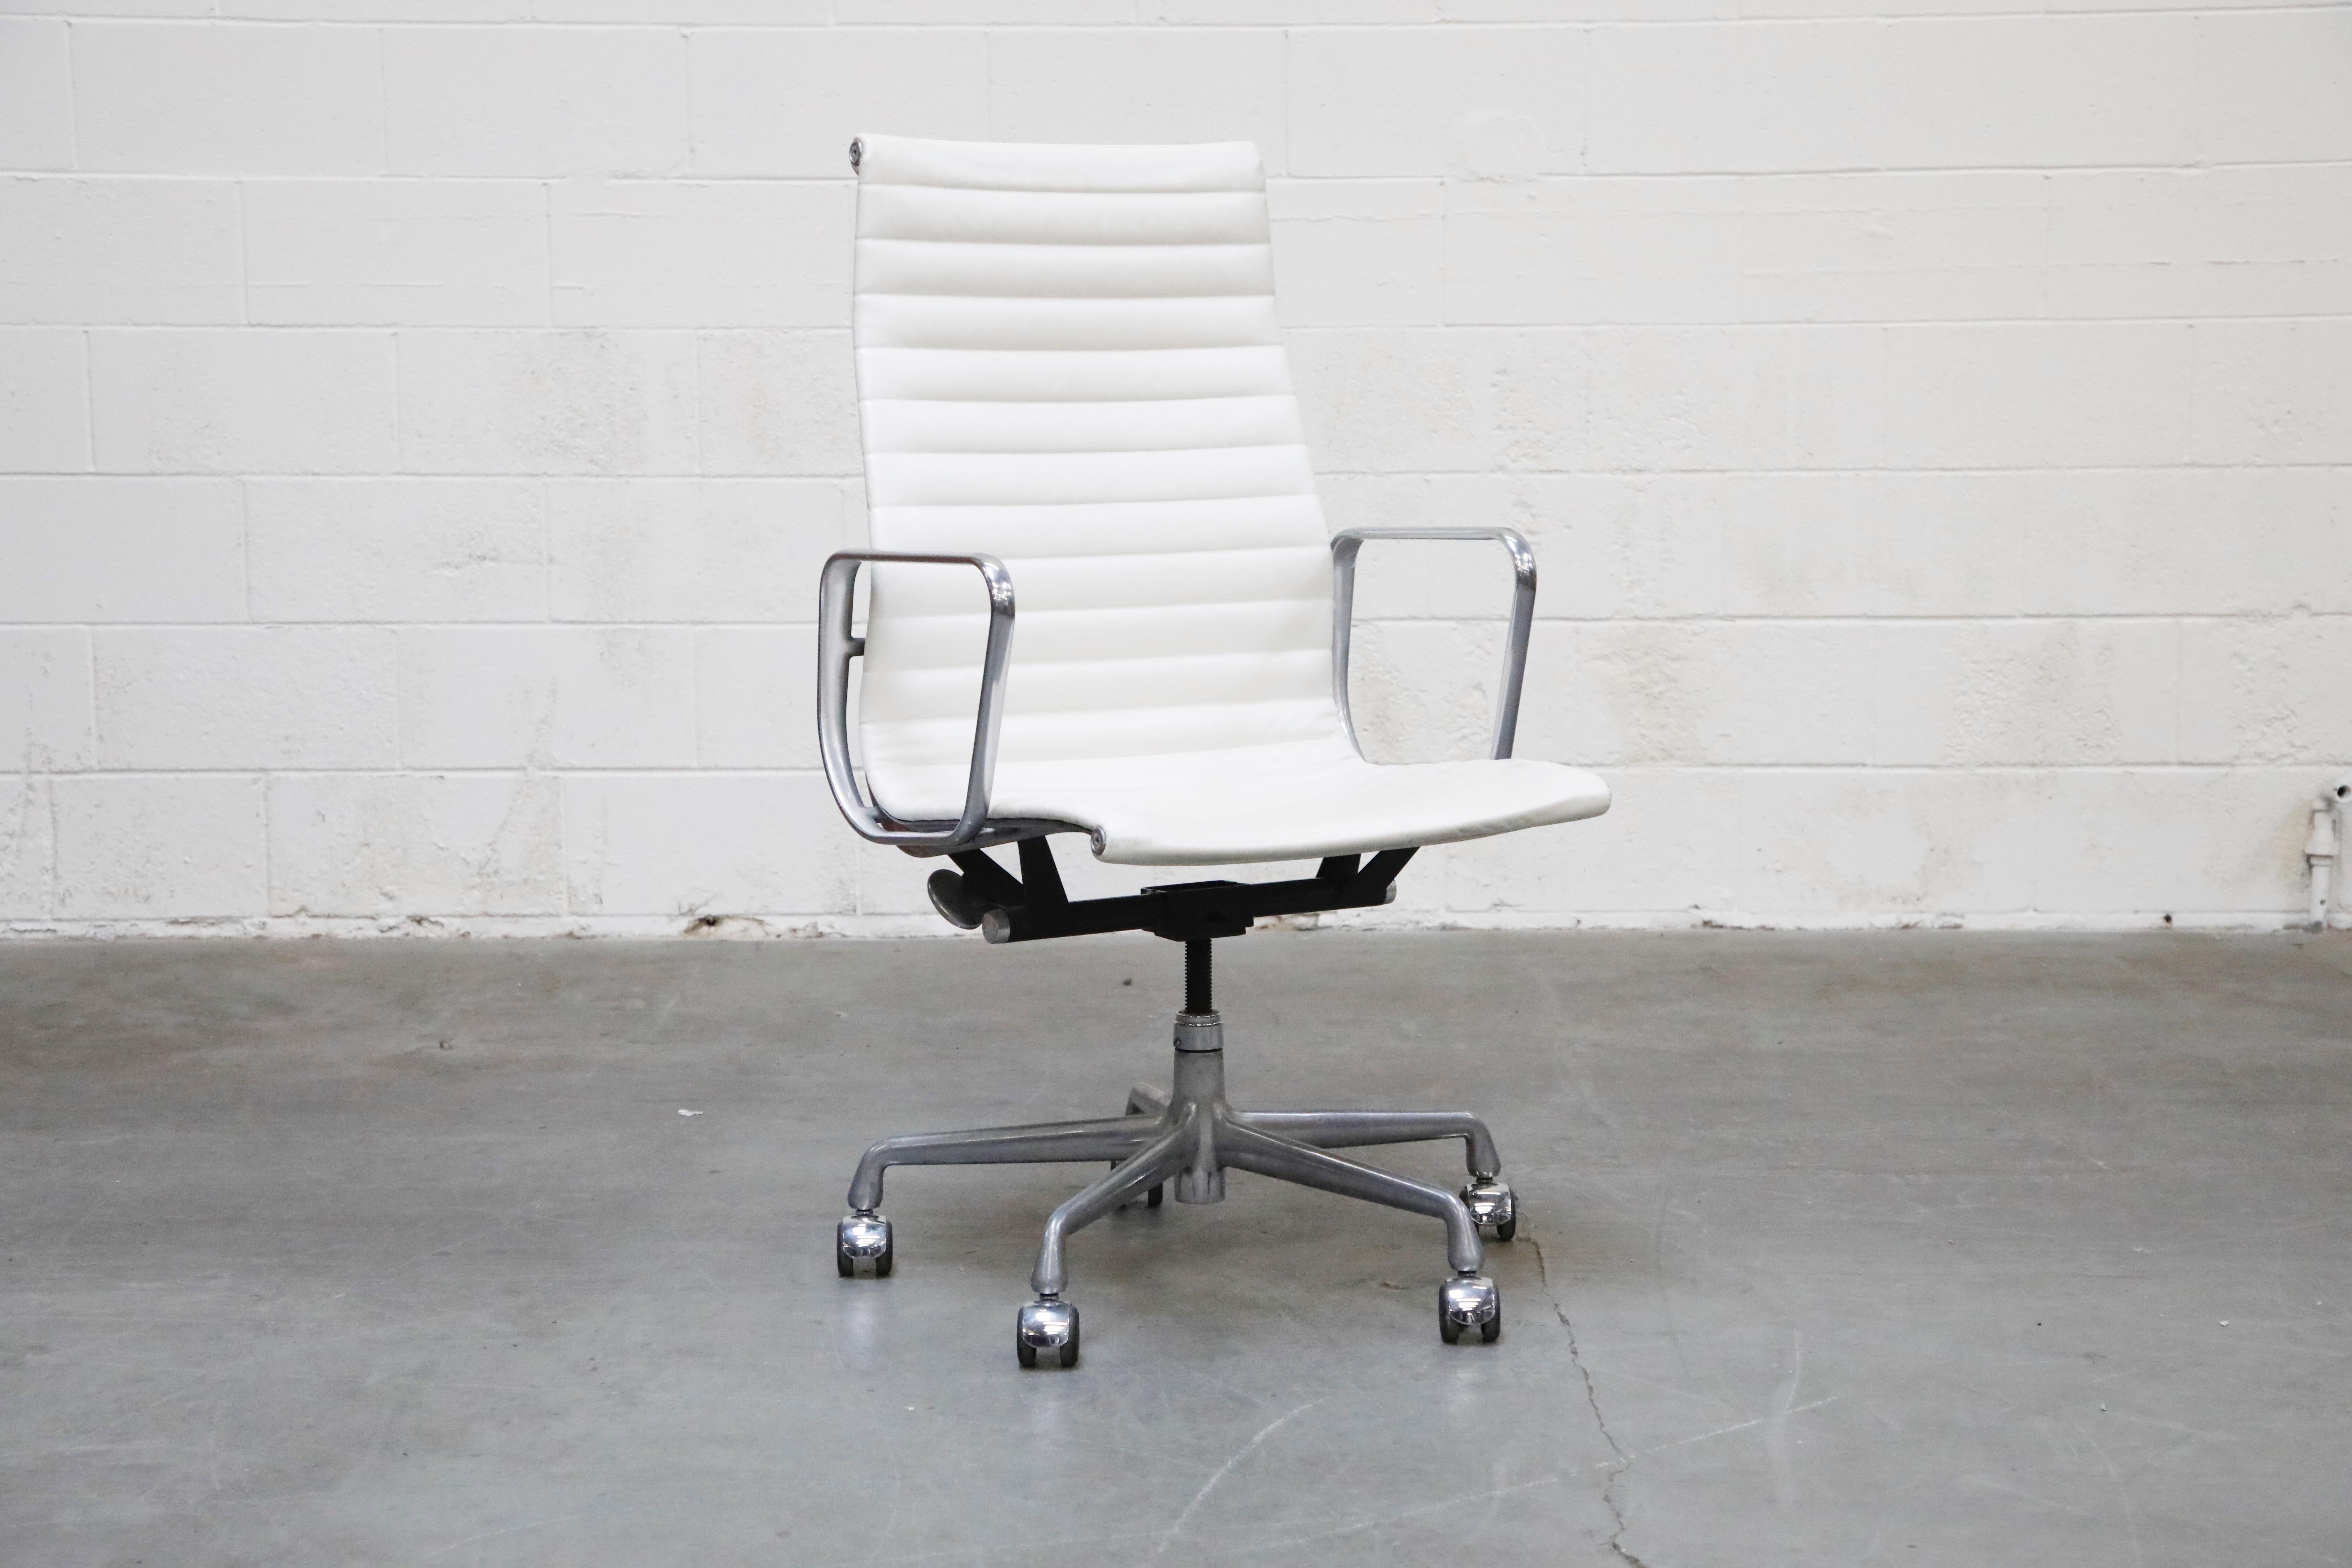 Mid-Century Modern Aluminum Group Executive Desk Chair by Charles Eames for Herman Miller, Signed